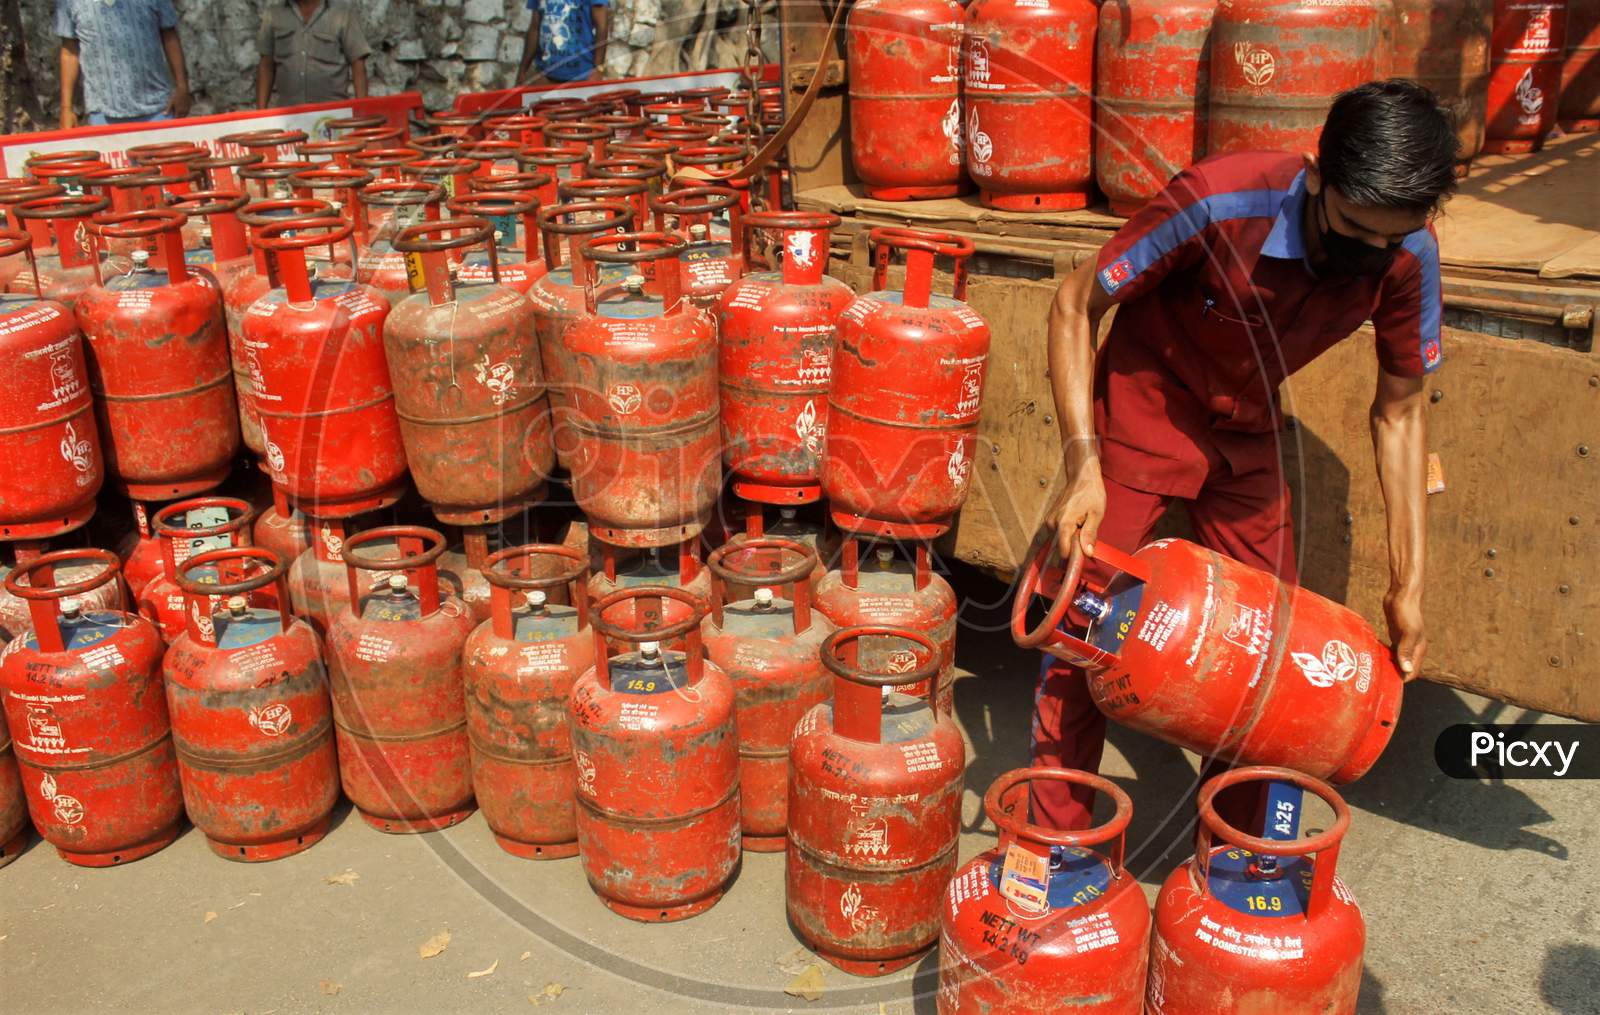 A worker unloads gas cylinders from a vehicle for people to purchase, after India ordered a 21- day nationwide lockdown to limit the spreading of coronavirus disease (COVID-19) in Mumbai, India on March 27, 2020.